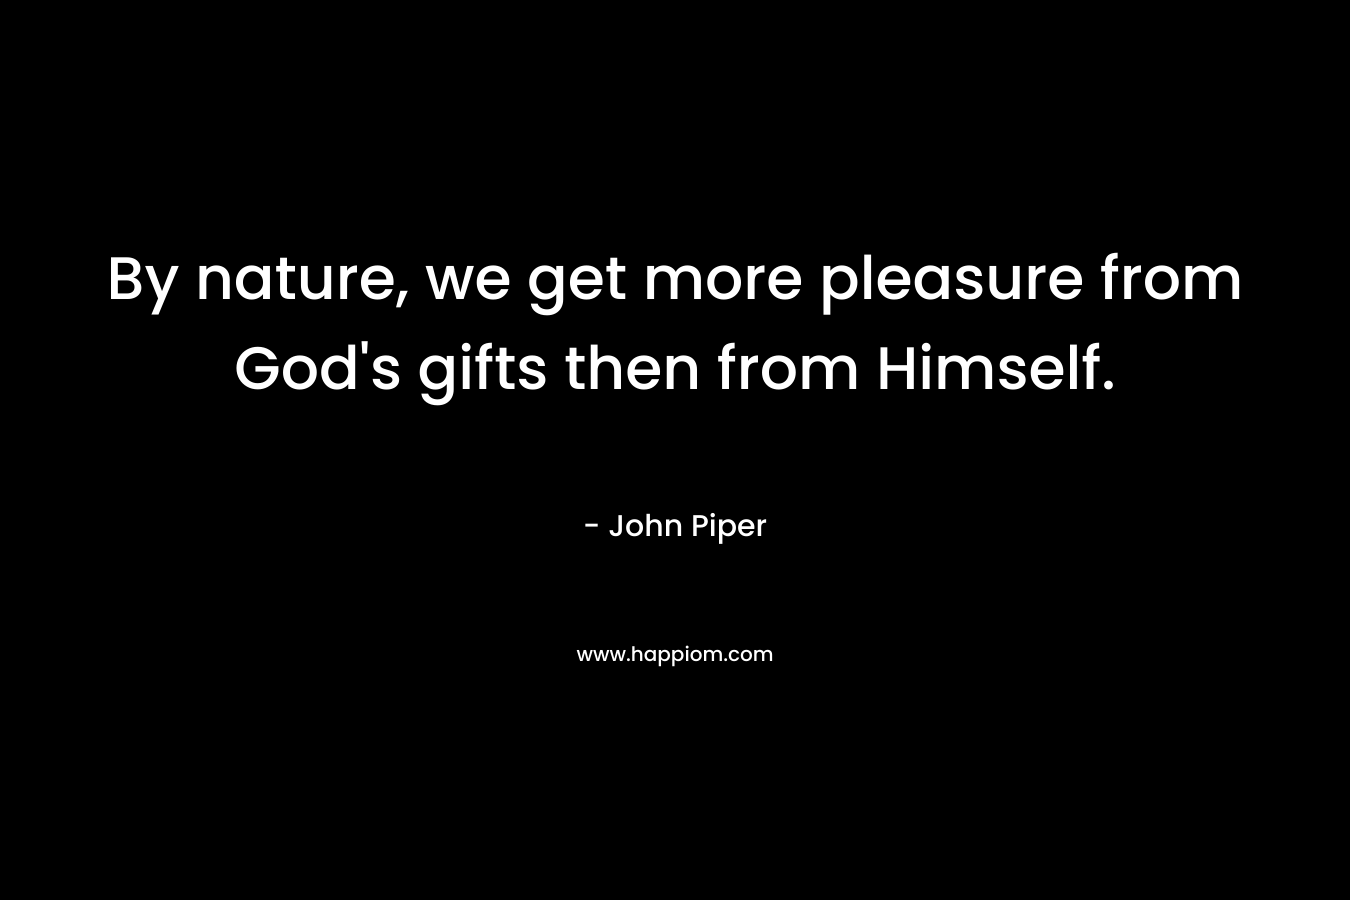 By nature, we get more pleasure from God's gifts then from Himself.